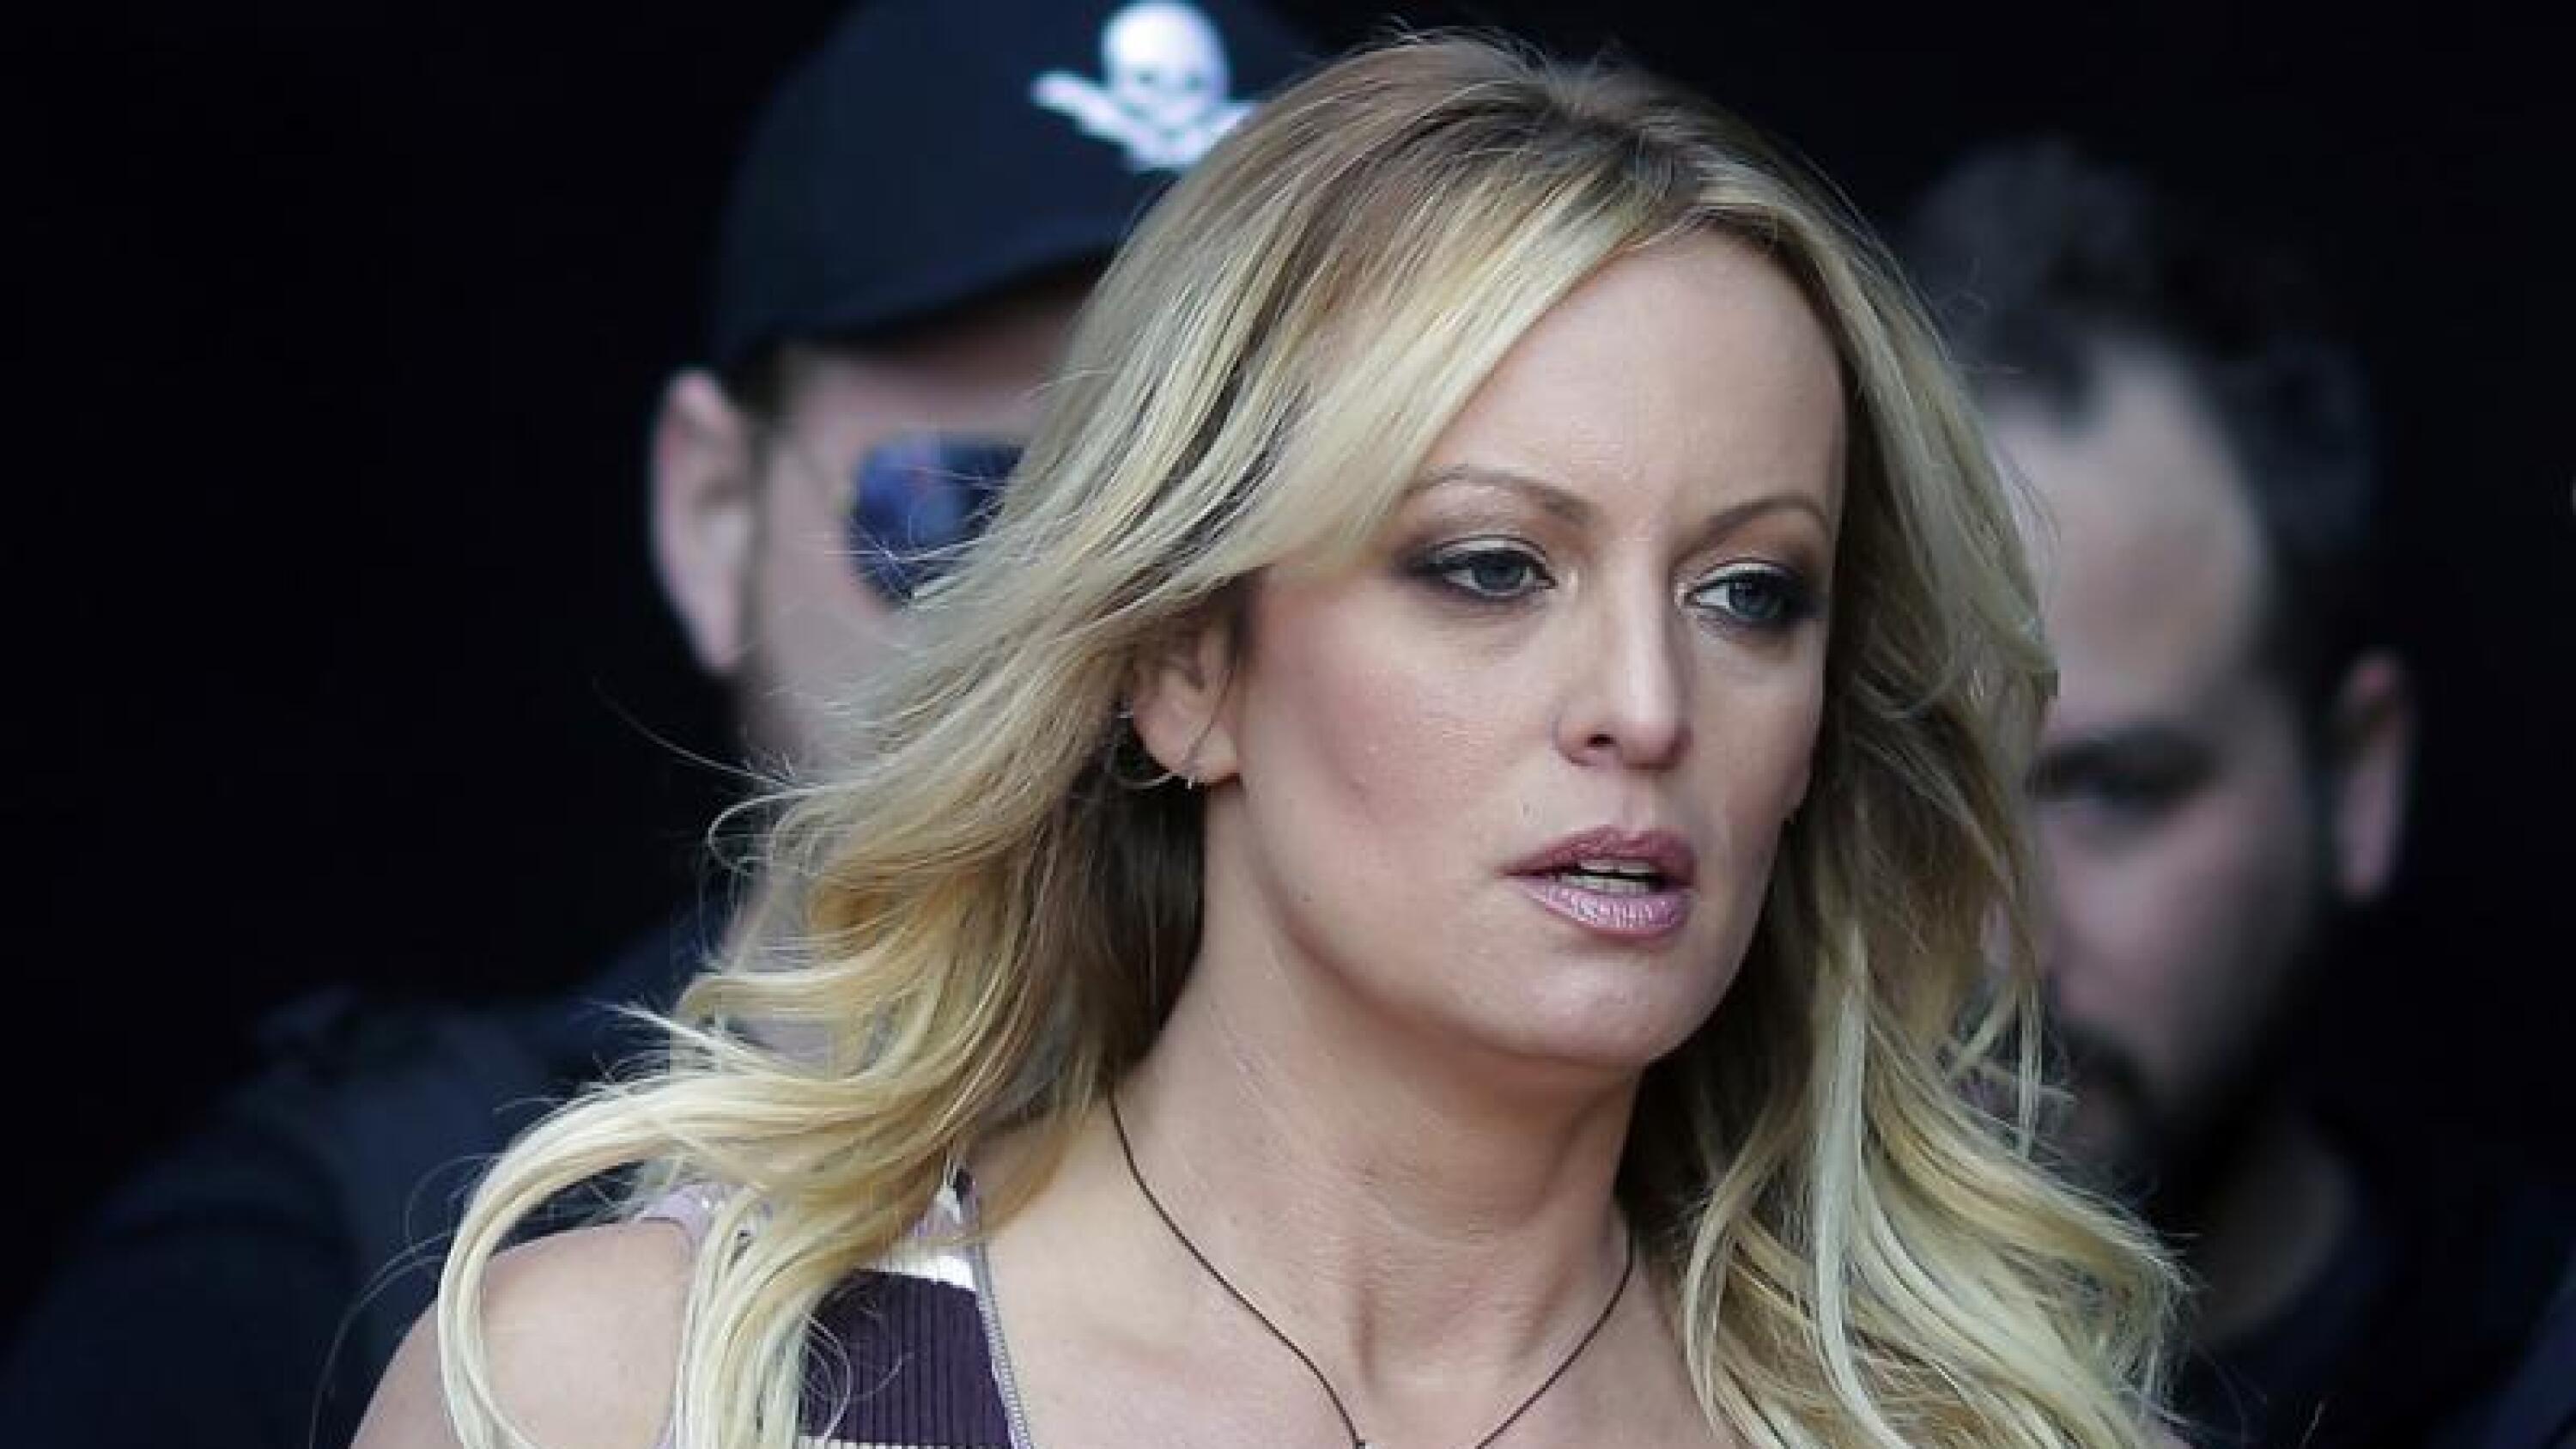 Porn performer Stormy Daniels is called to the witness stand at Trump's hush money trial